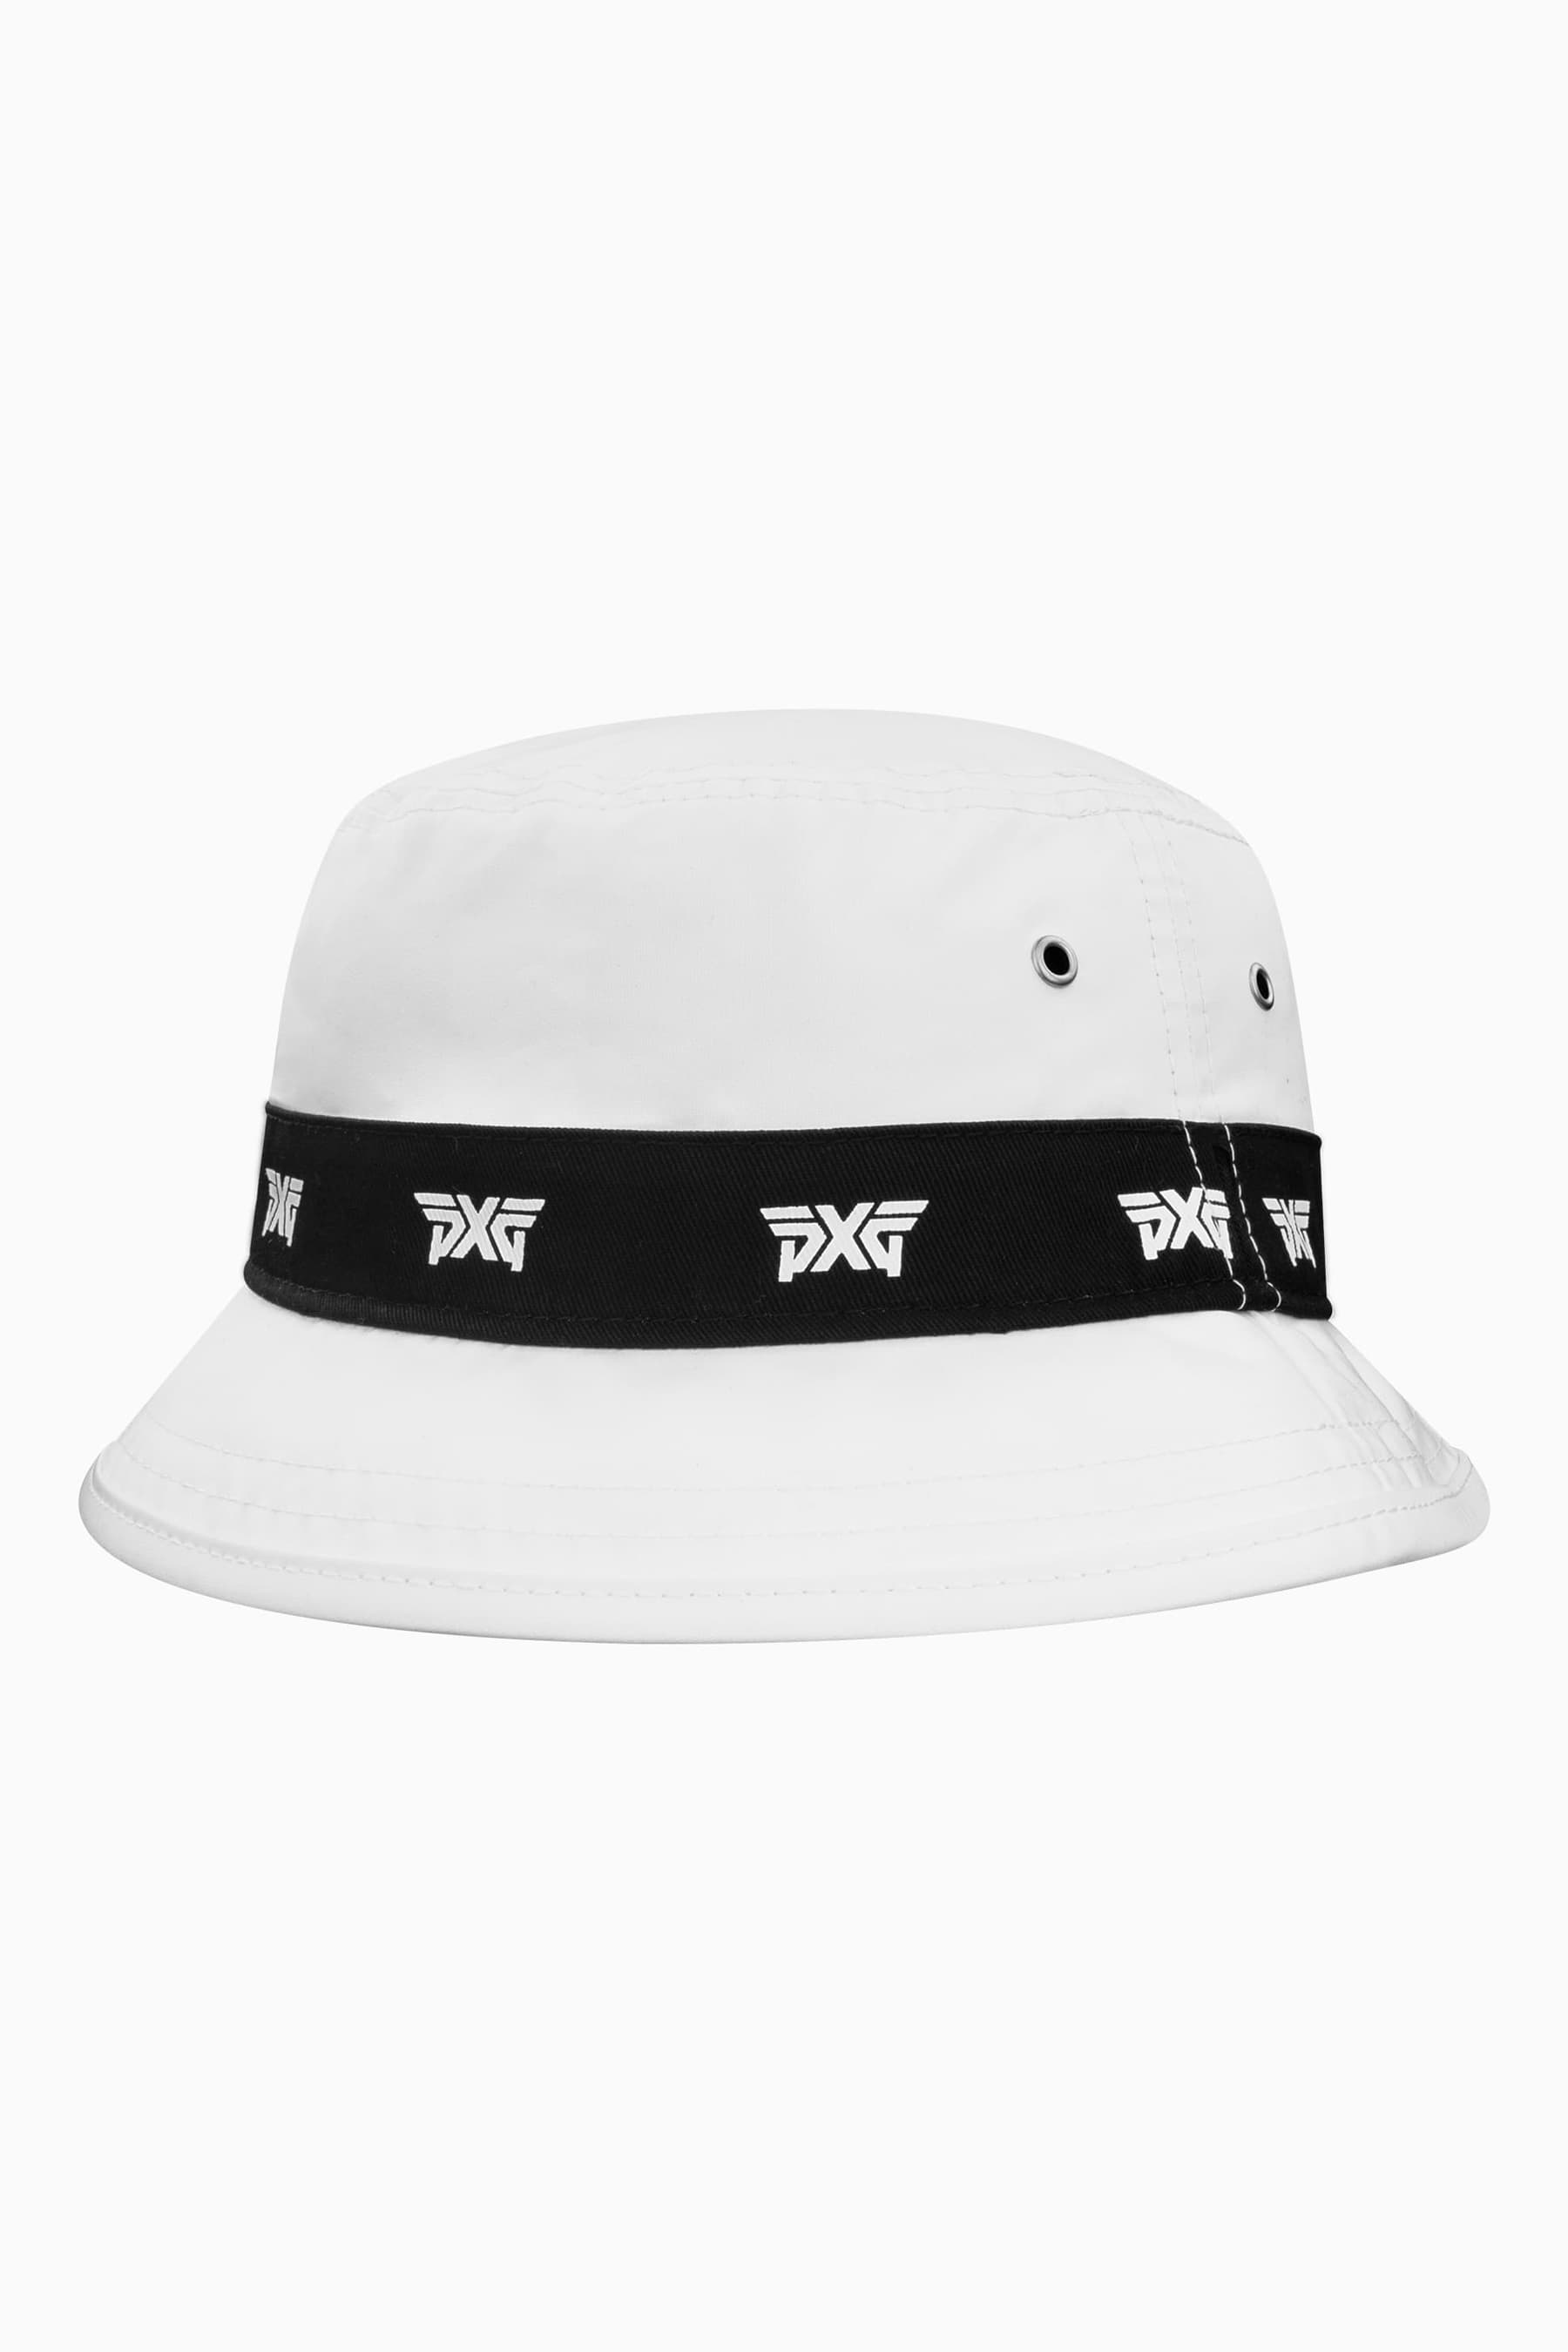 Shop and Golf PXG Golf Logo | Hat Bucket Quality Gear, Accessories Highest at Clubs Apparel, the Repeat